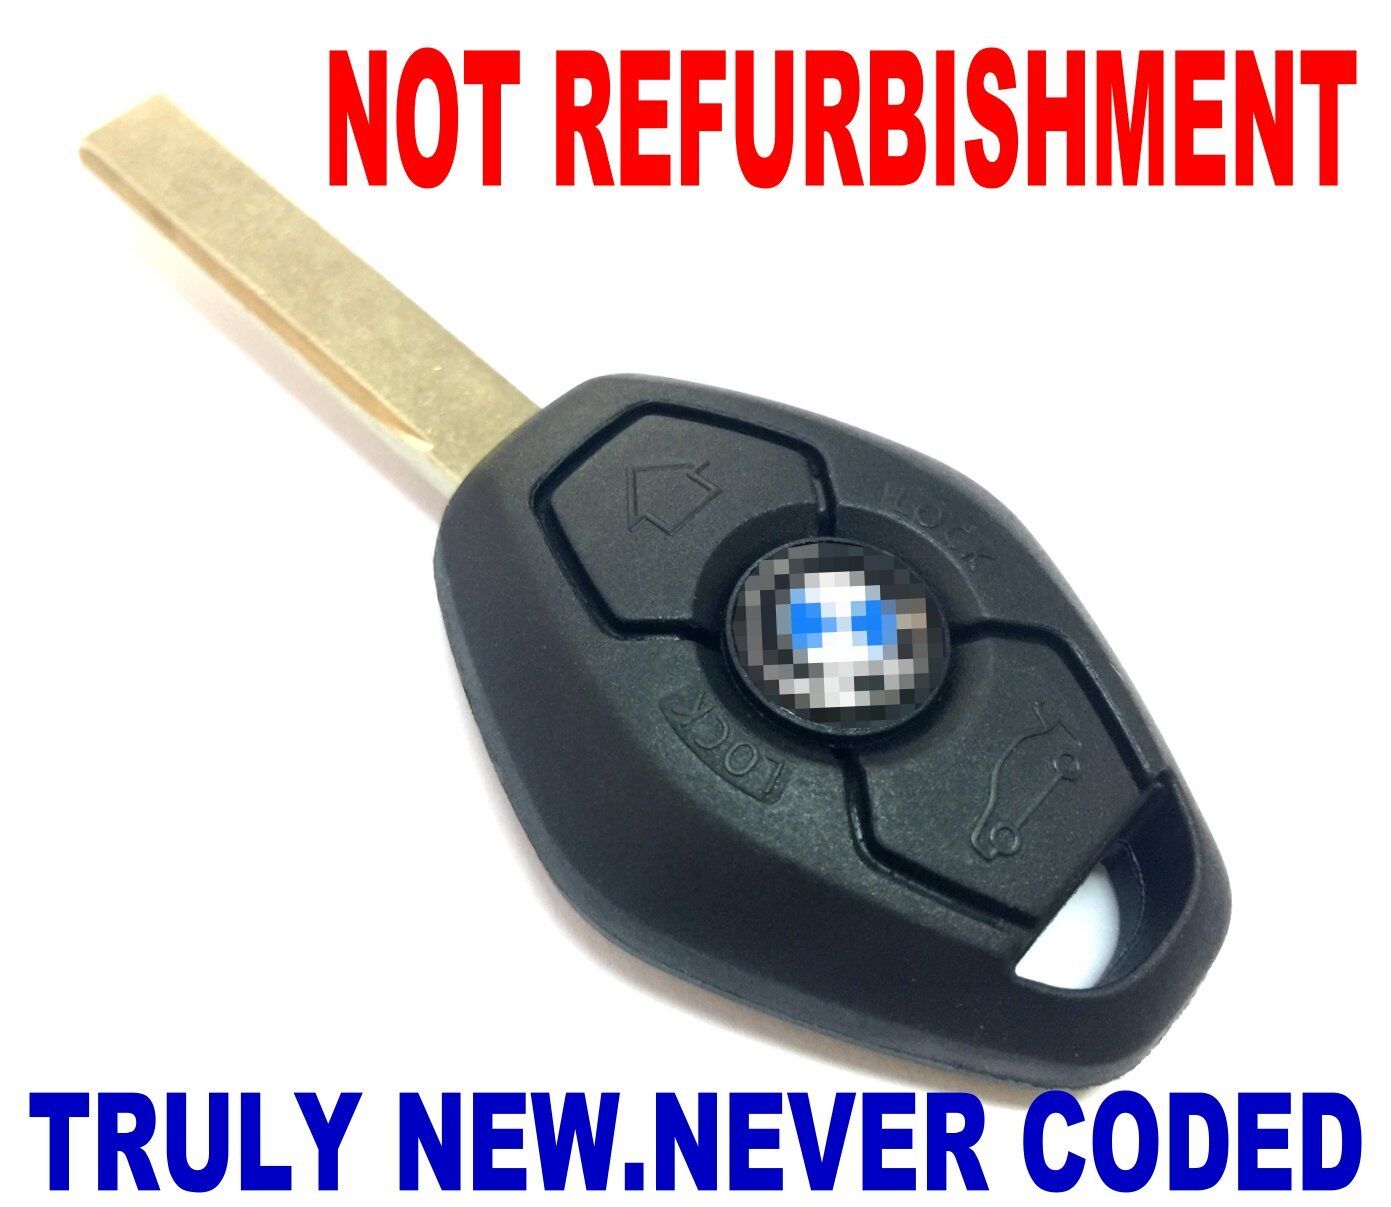 BRAND NEW UNCODED CHIP KEYLESS ENTRY REMOTE TRANSMITTER FOB COMPLETE KEY OEM E6